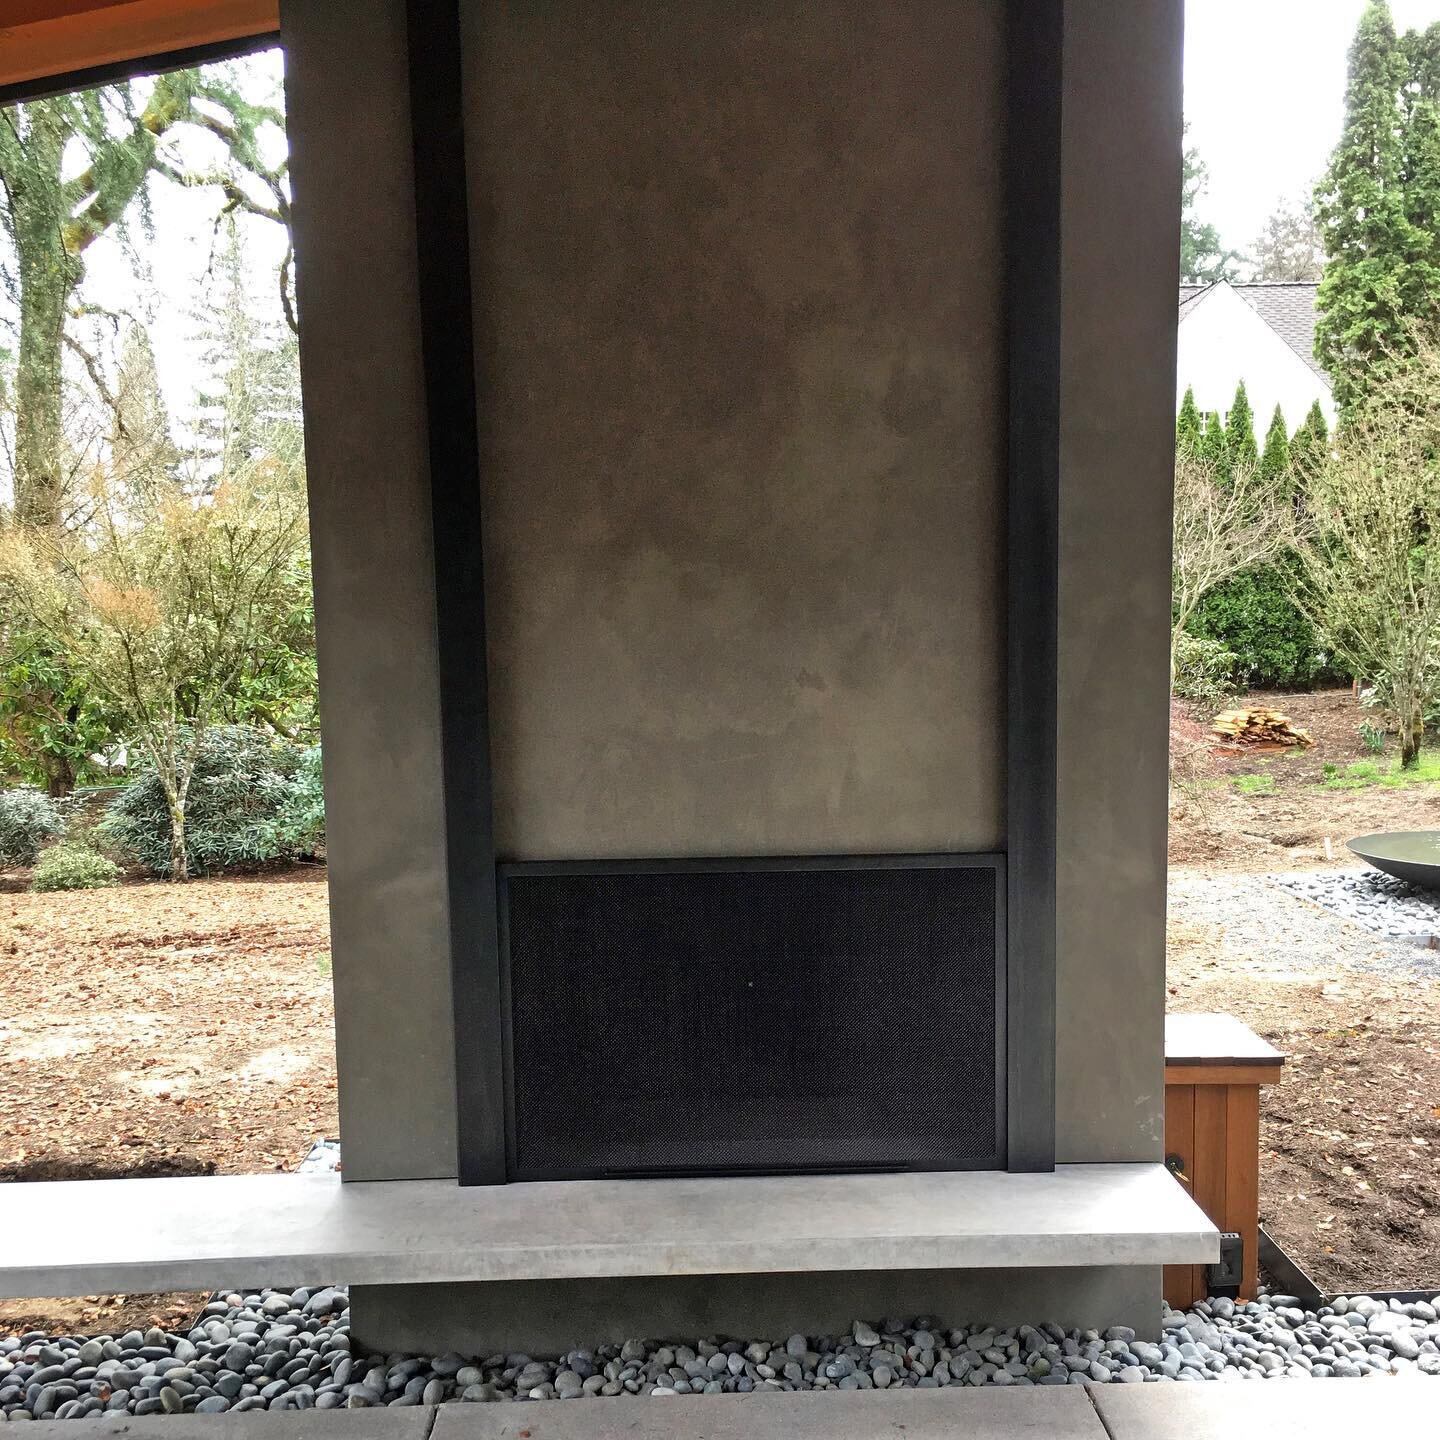 Counter-weighted guillotine fire screen in an outdoor seating area. #custommetalfabrication #outdoorfireplace #portland